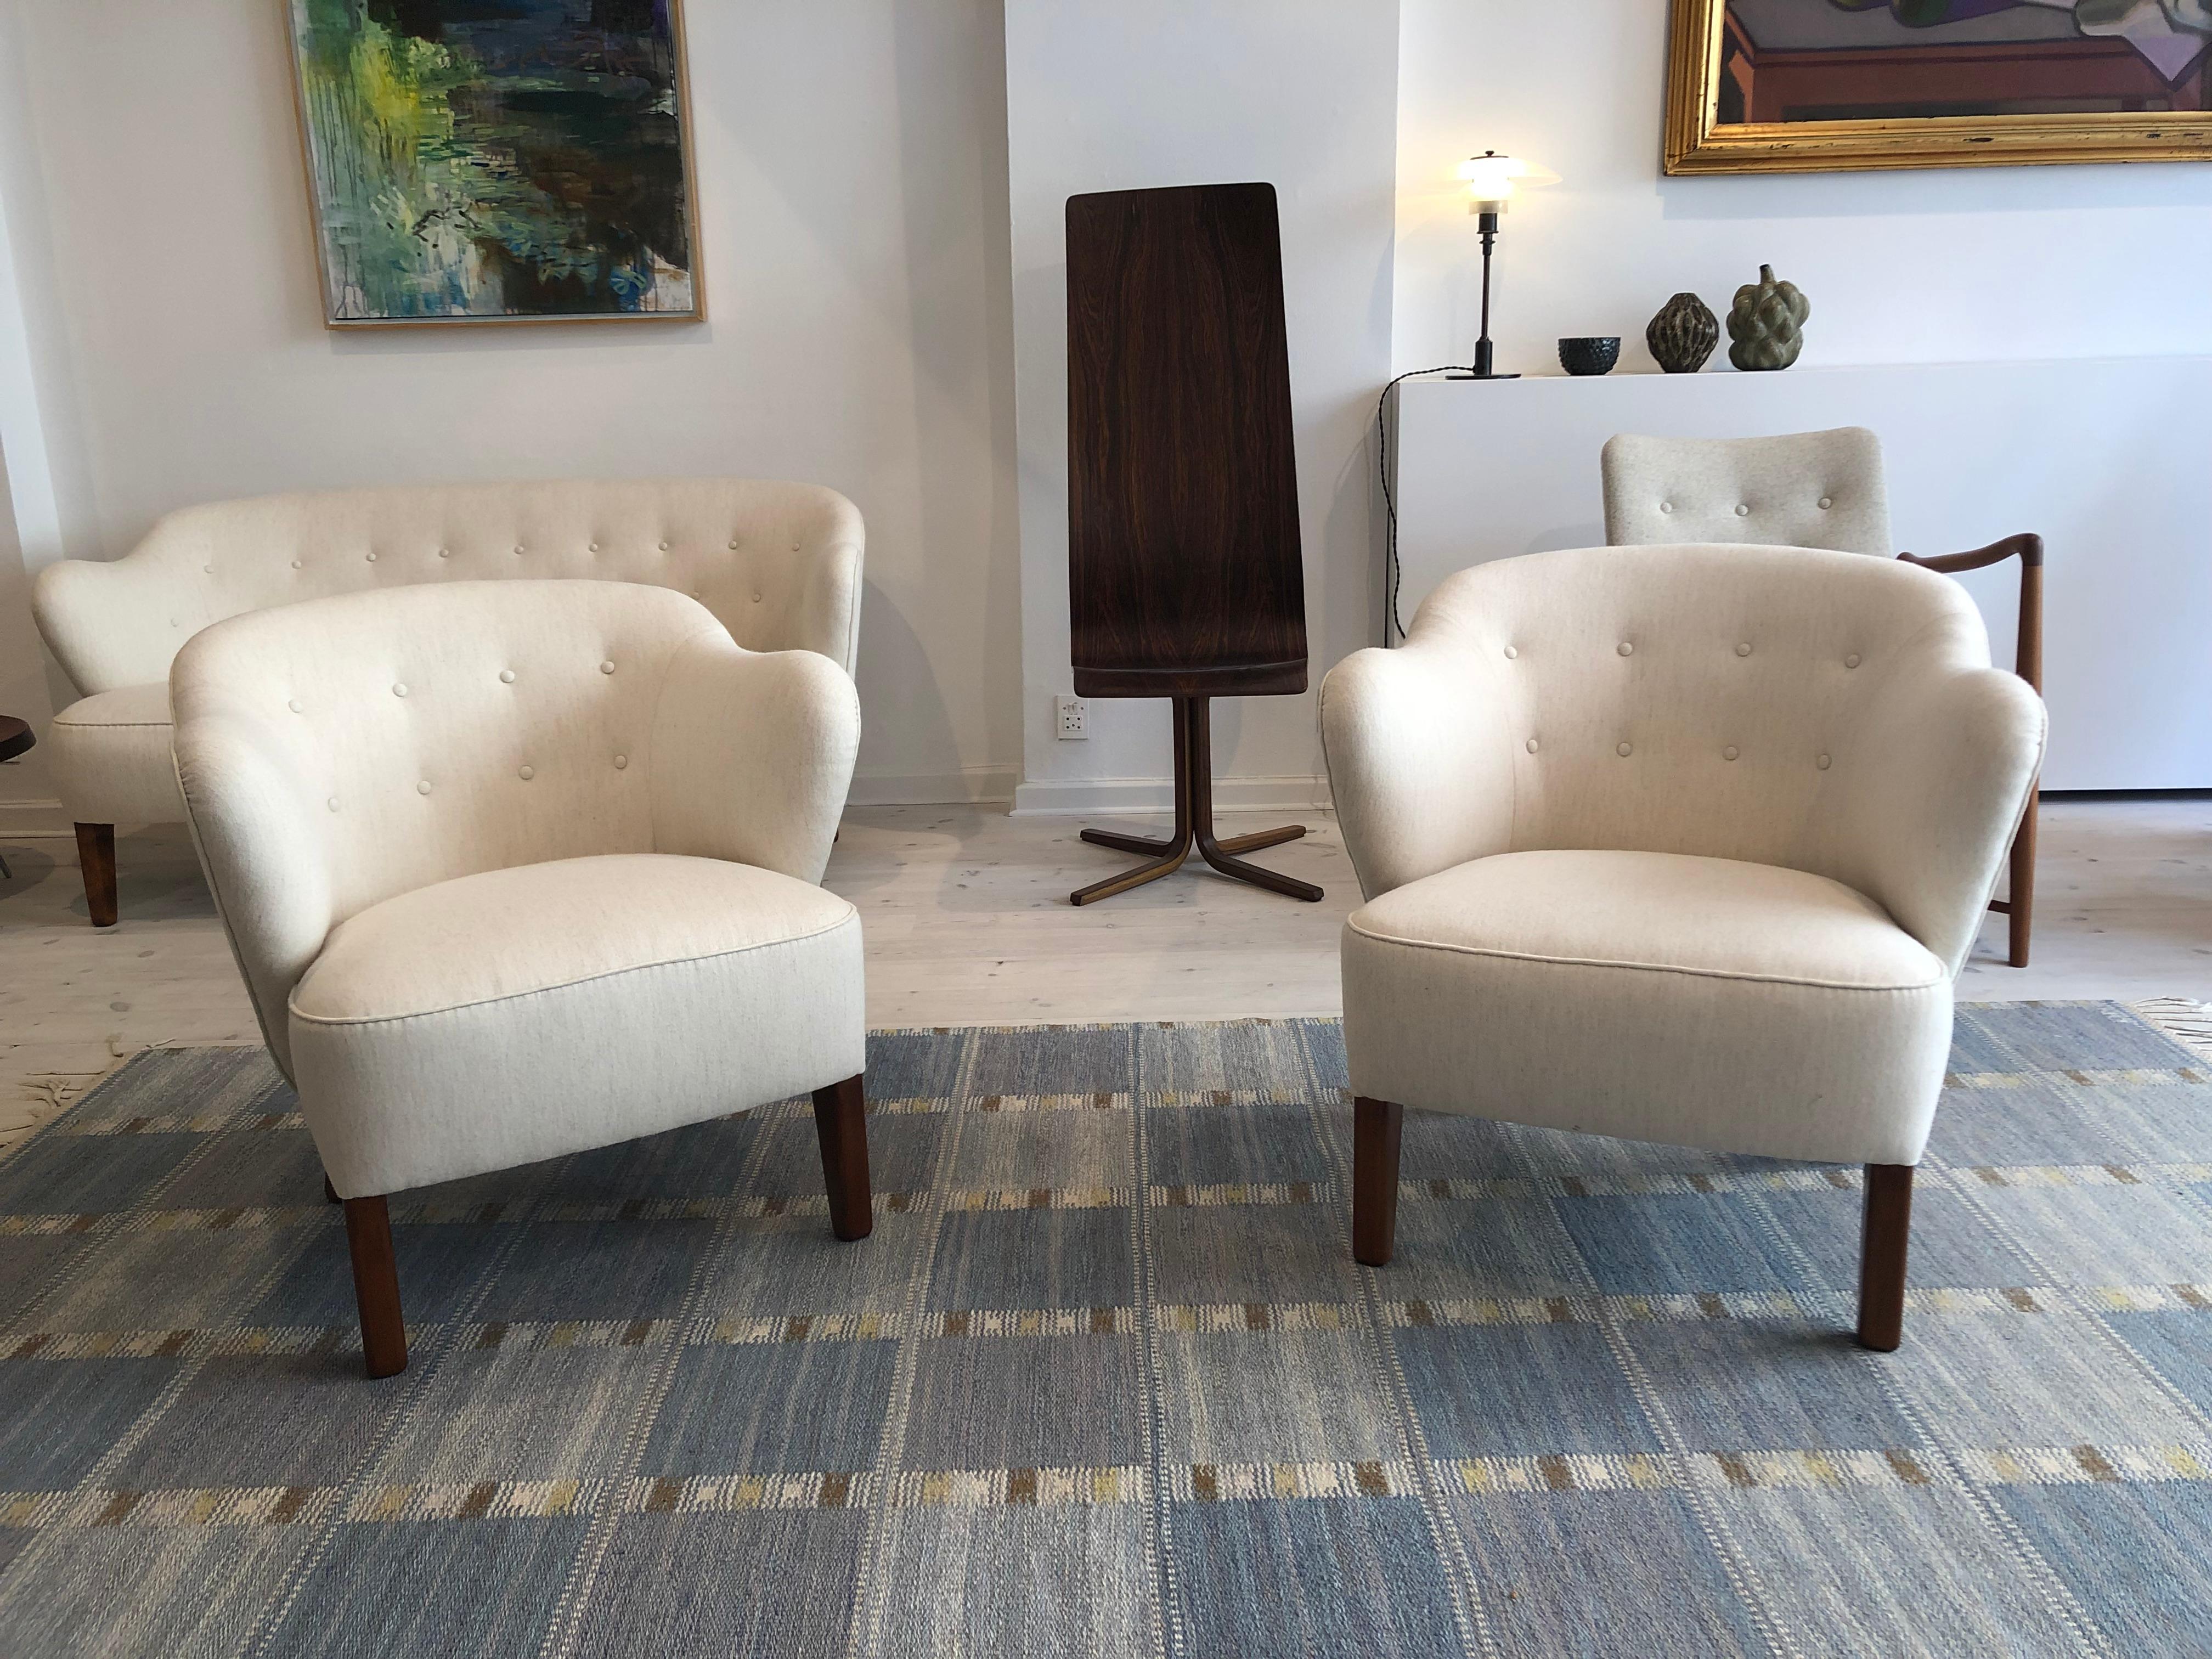 Flemming Lassen Pair of Easy Chairs in White Fabric, 1940s For Sale 1